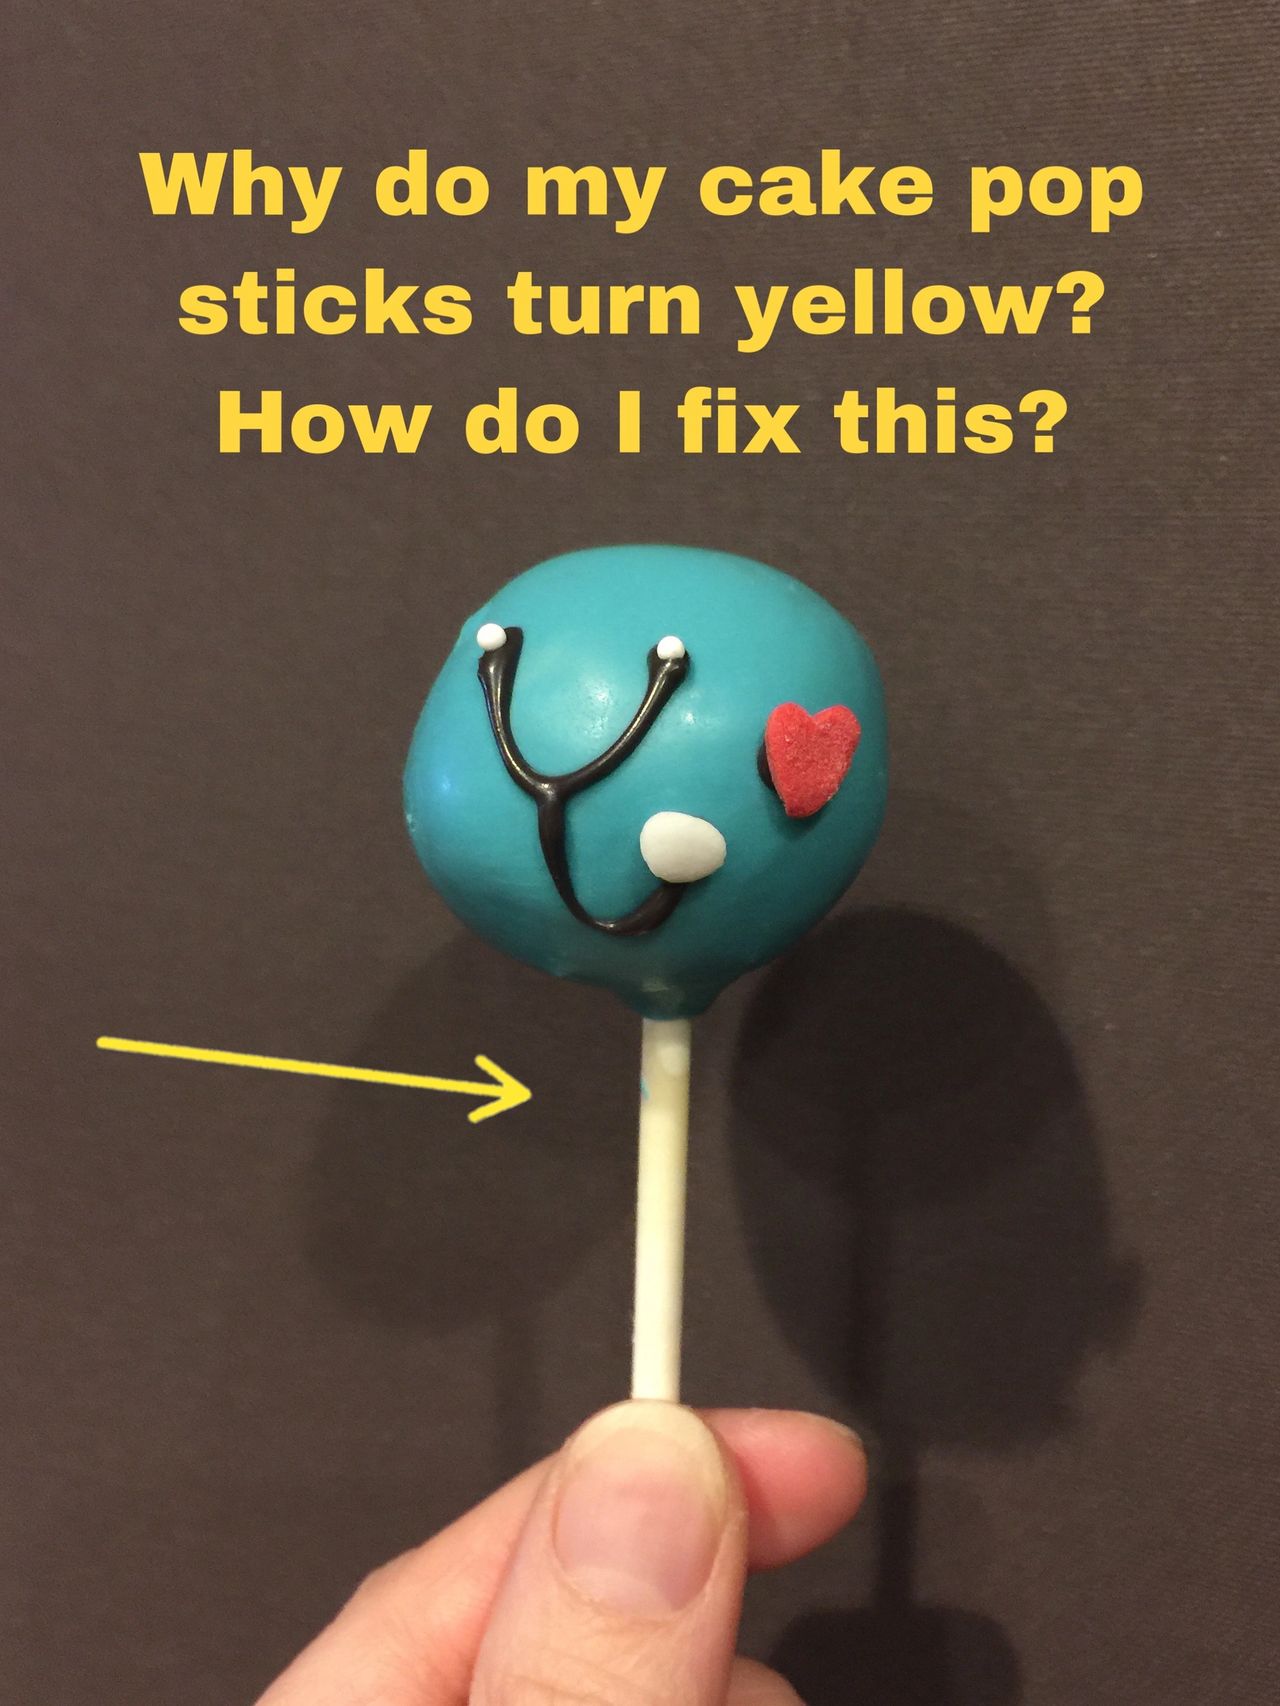 Why are my cake pop sticks turning yellow? How do I fix this?